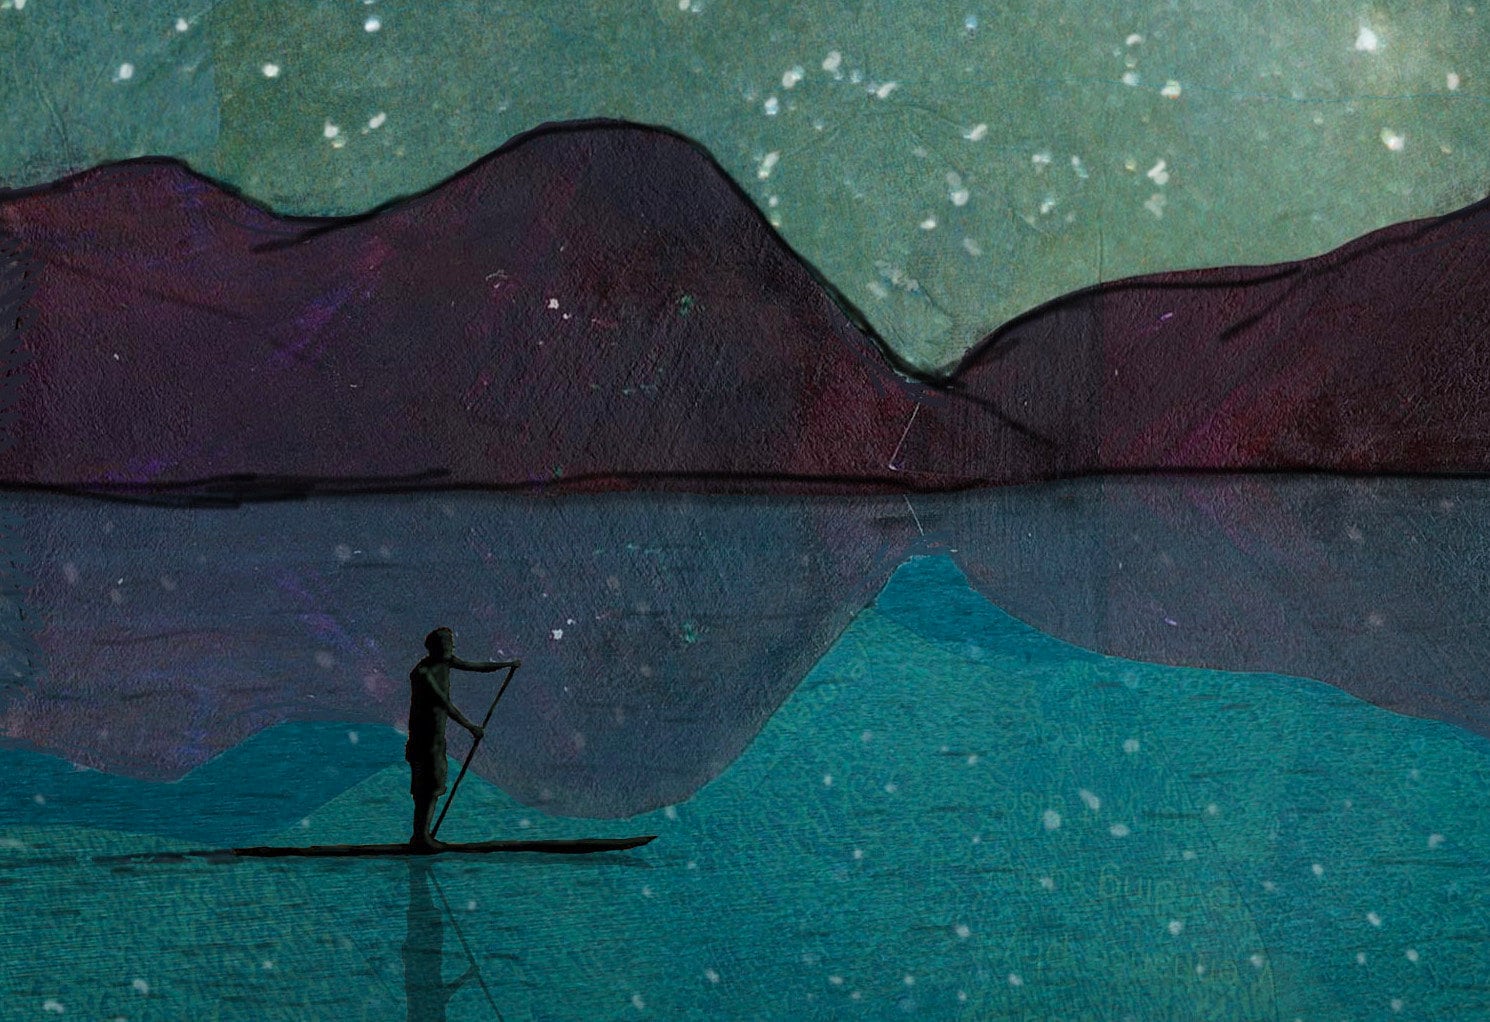 Greeting Card of a Paper Collage of a person stand up paddling on a lake under the night sky stars - inspirational - Blank Inside